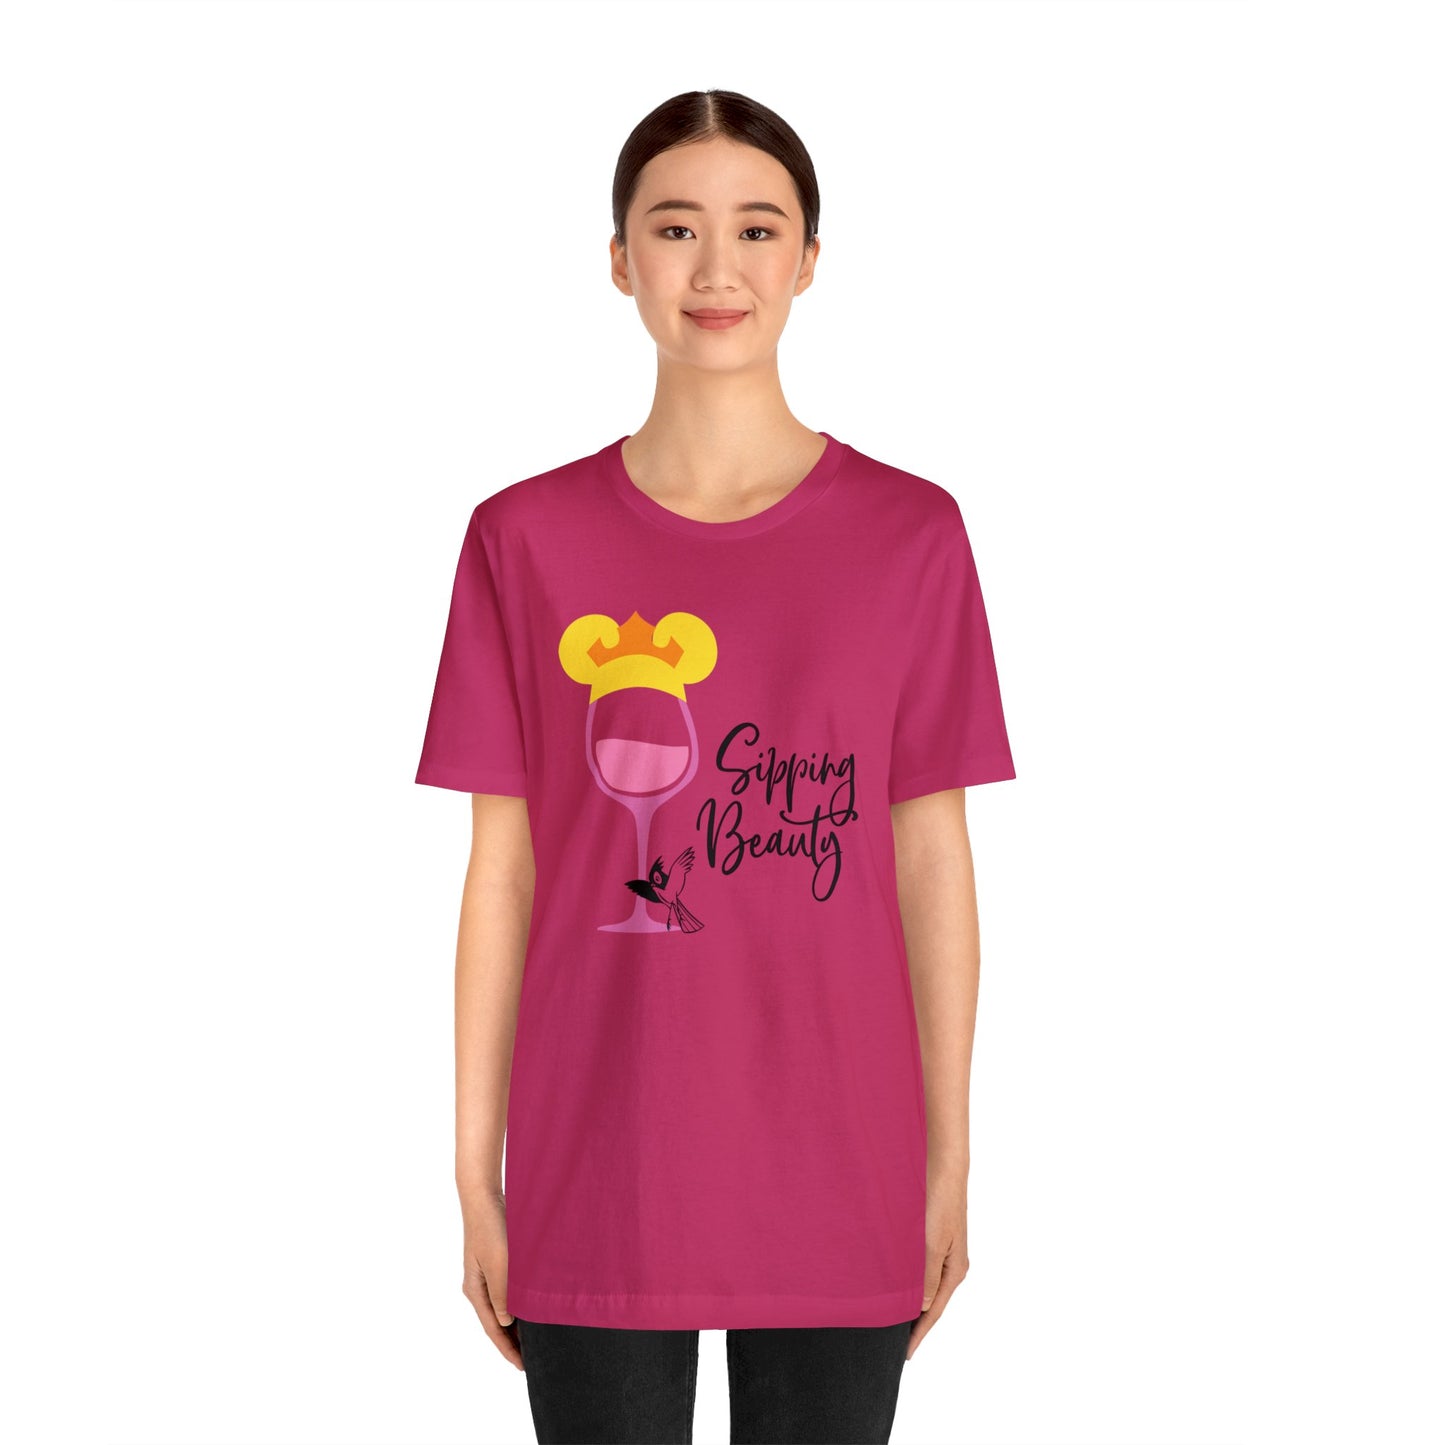 Sipping Beauty Unisex Graphic Tee